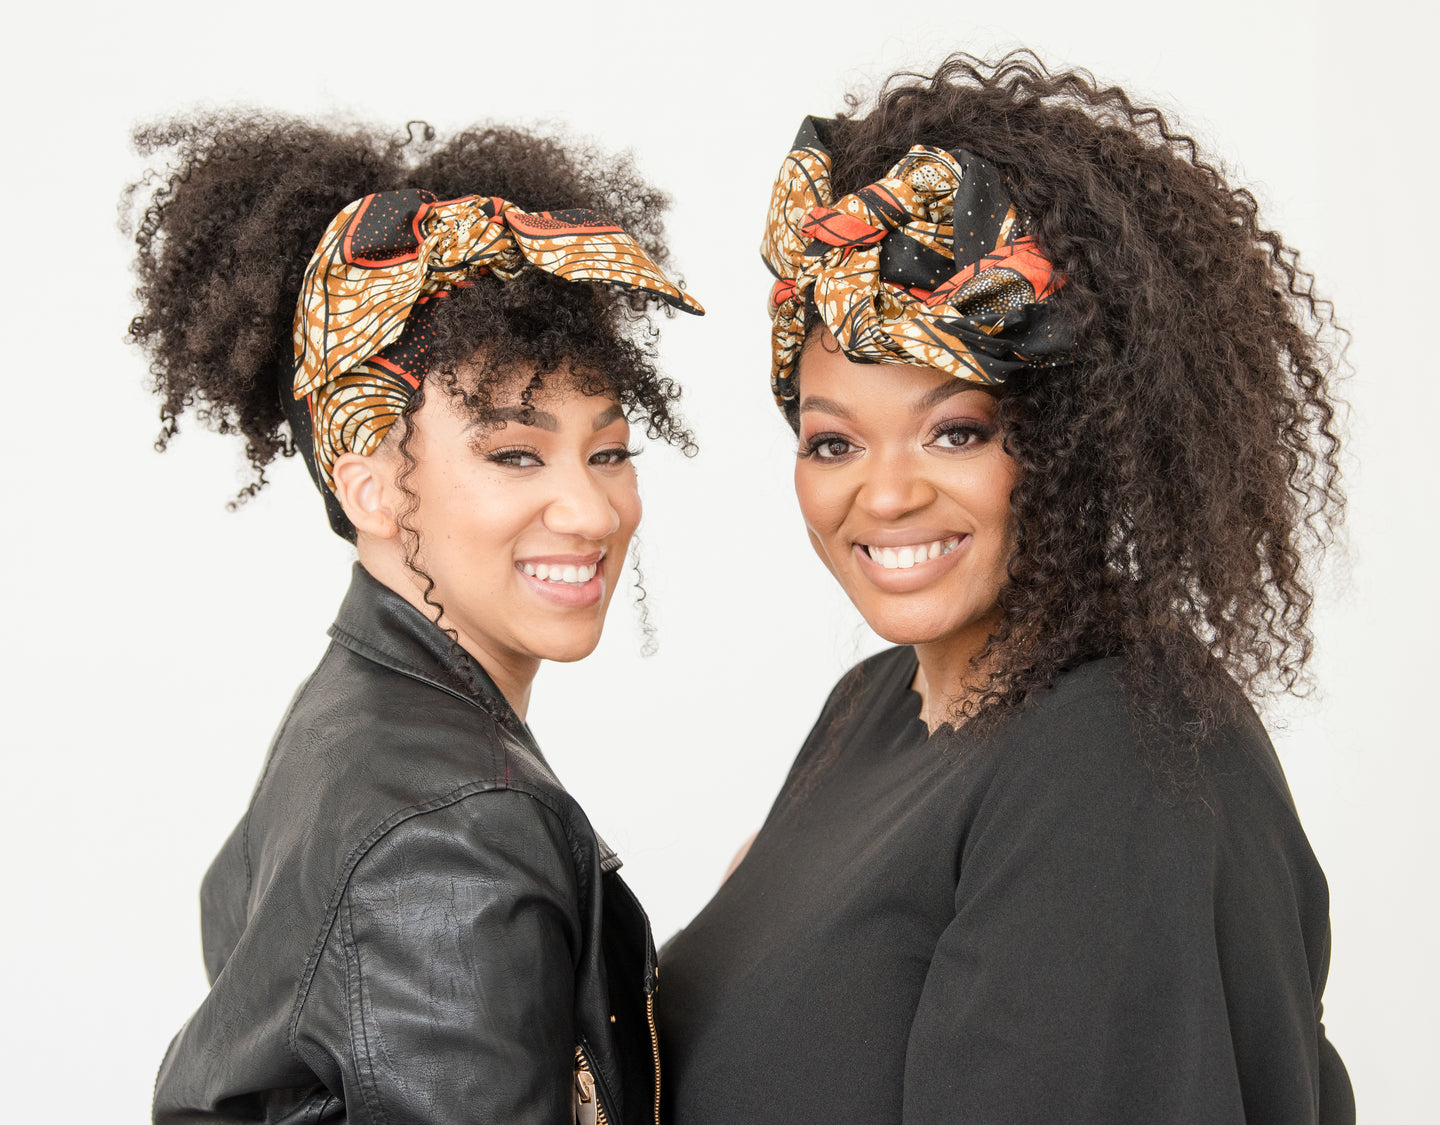 SATIN-LINED HEADWRAPS